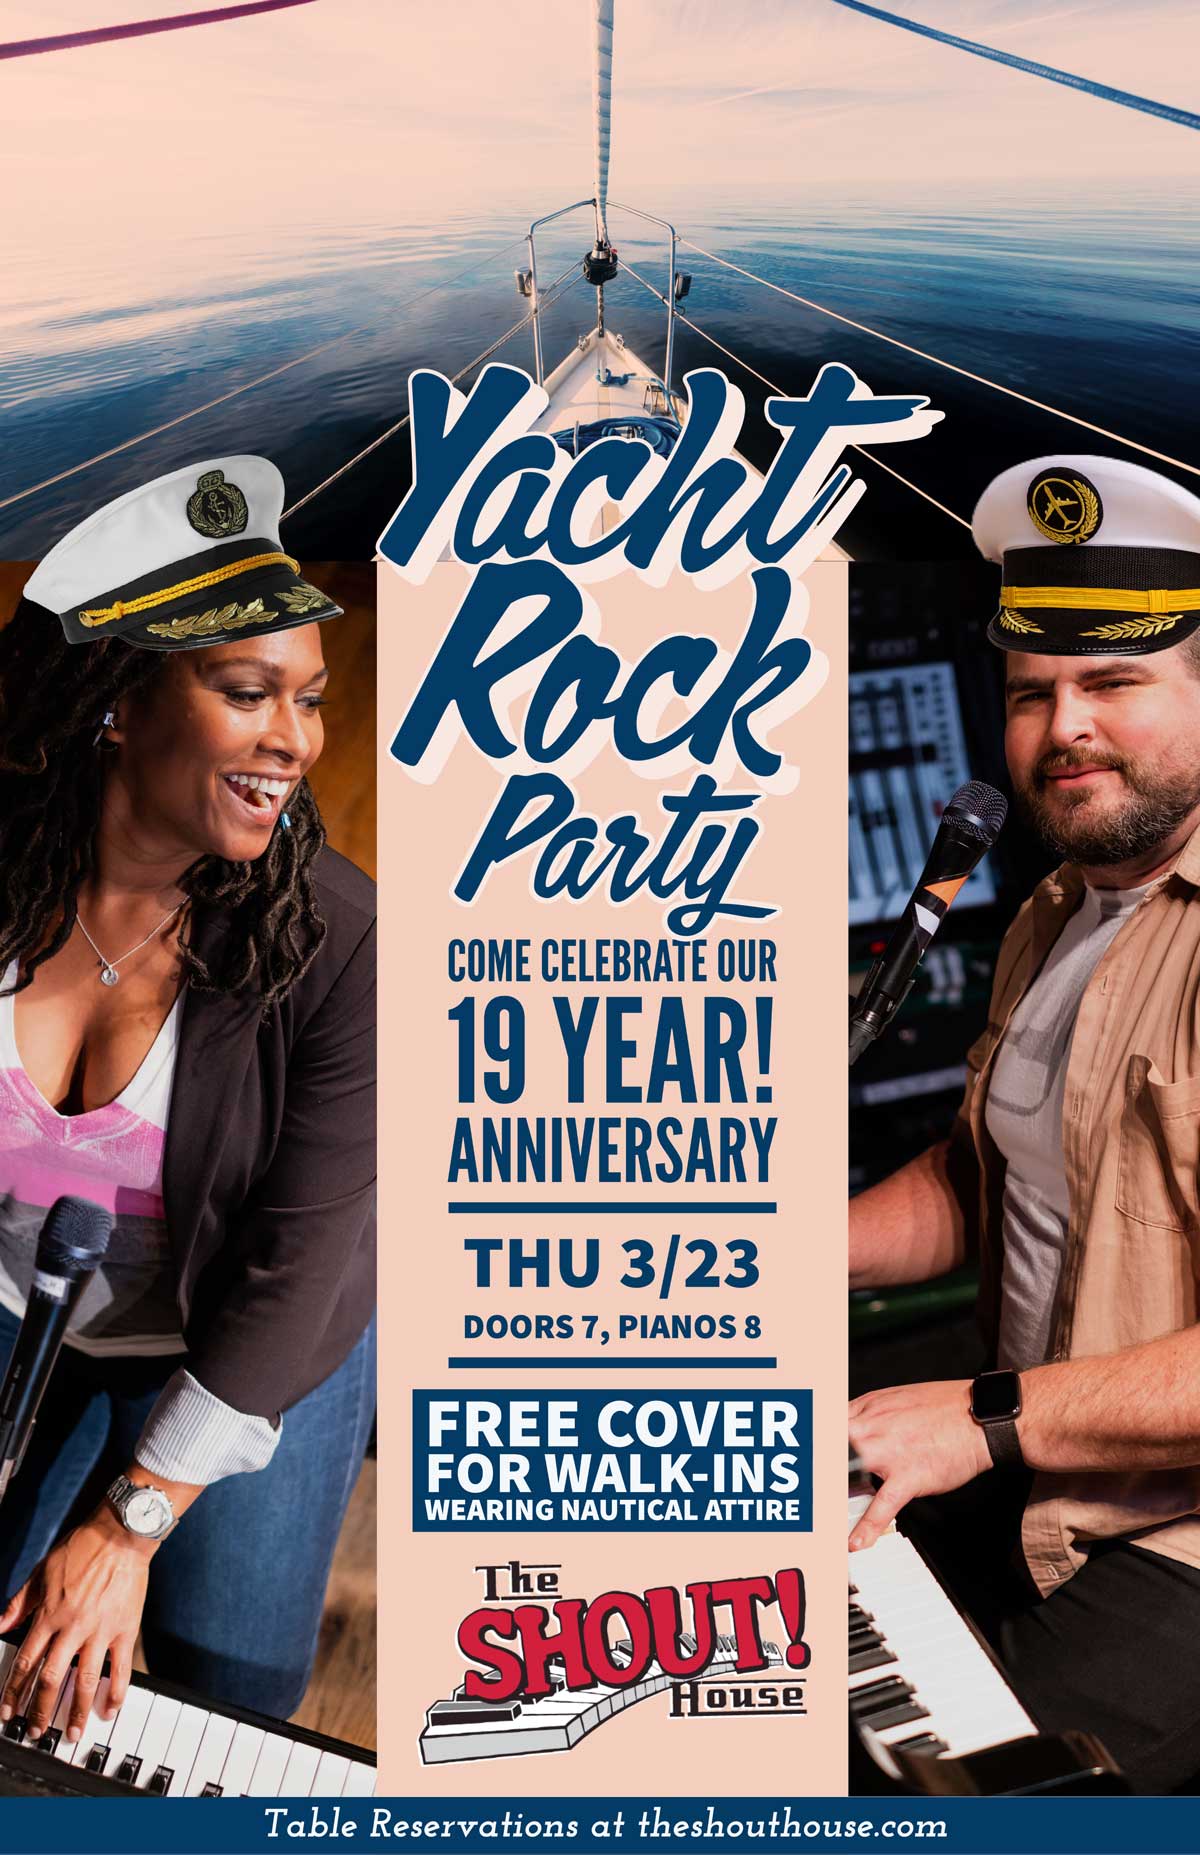 what is a yacht rock party